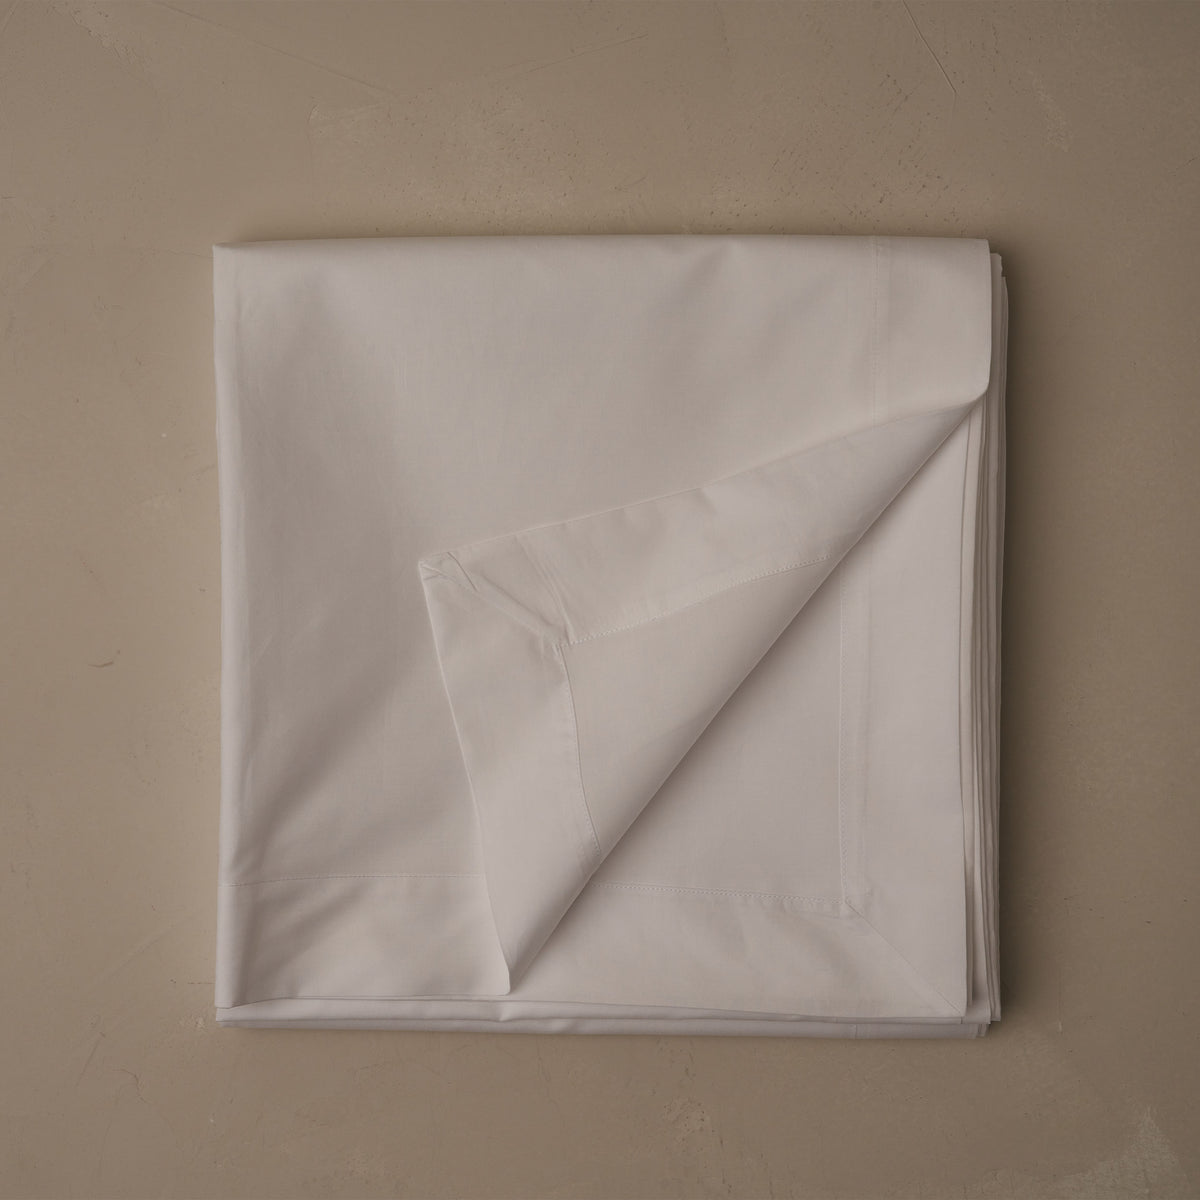 Ultra soft, cool and rare LETTO Sea Island Cotton Percale flat sheet in color white, made in Italy data-image-id=